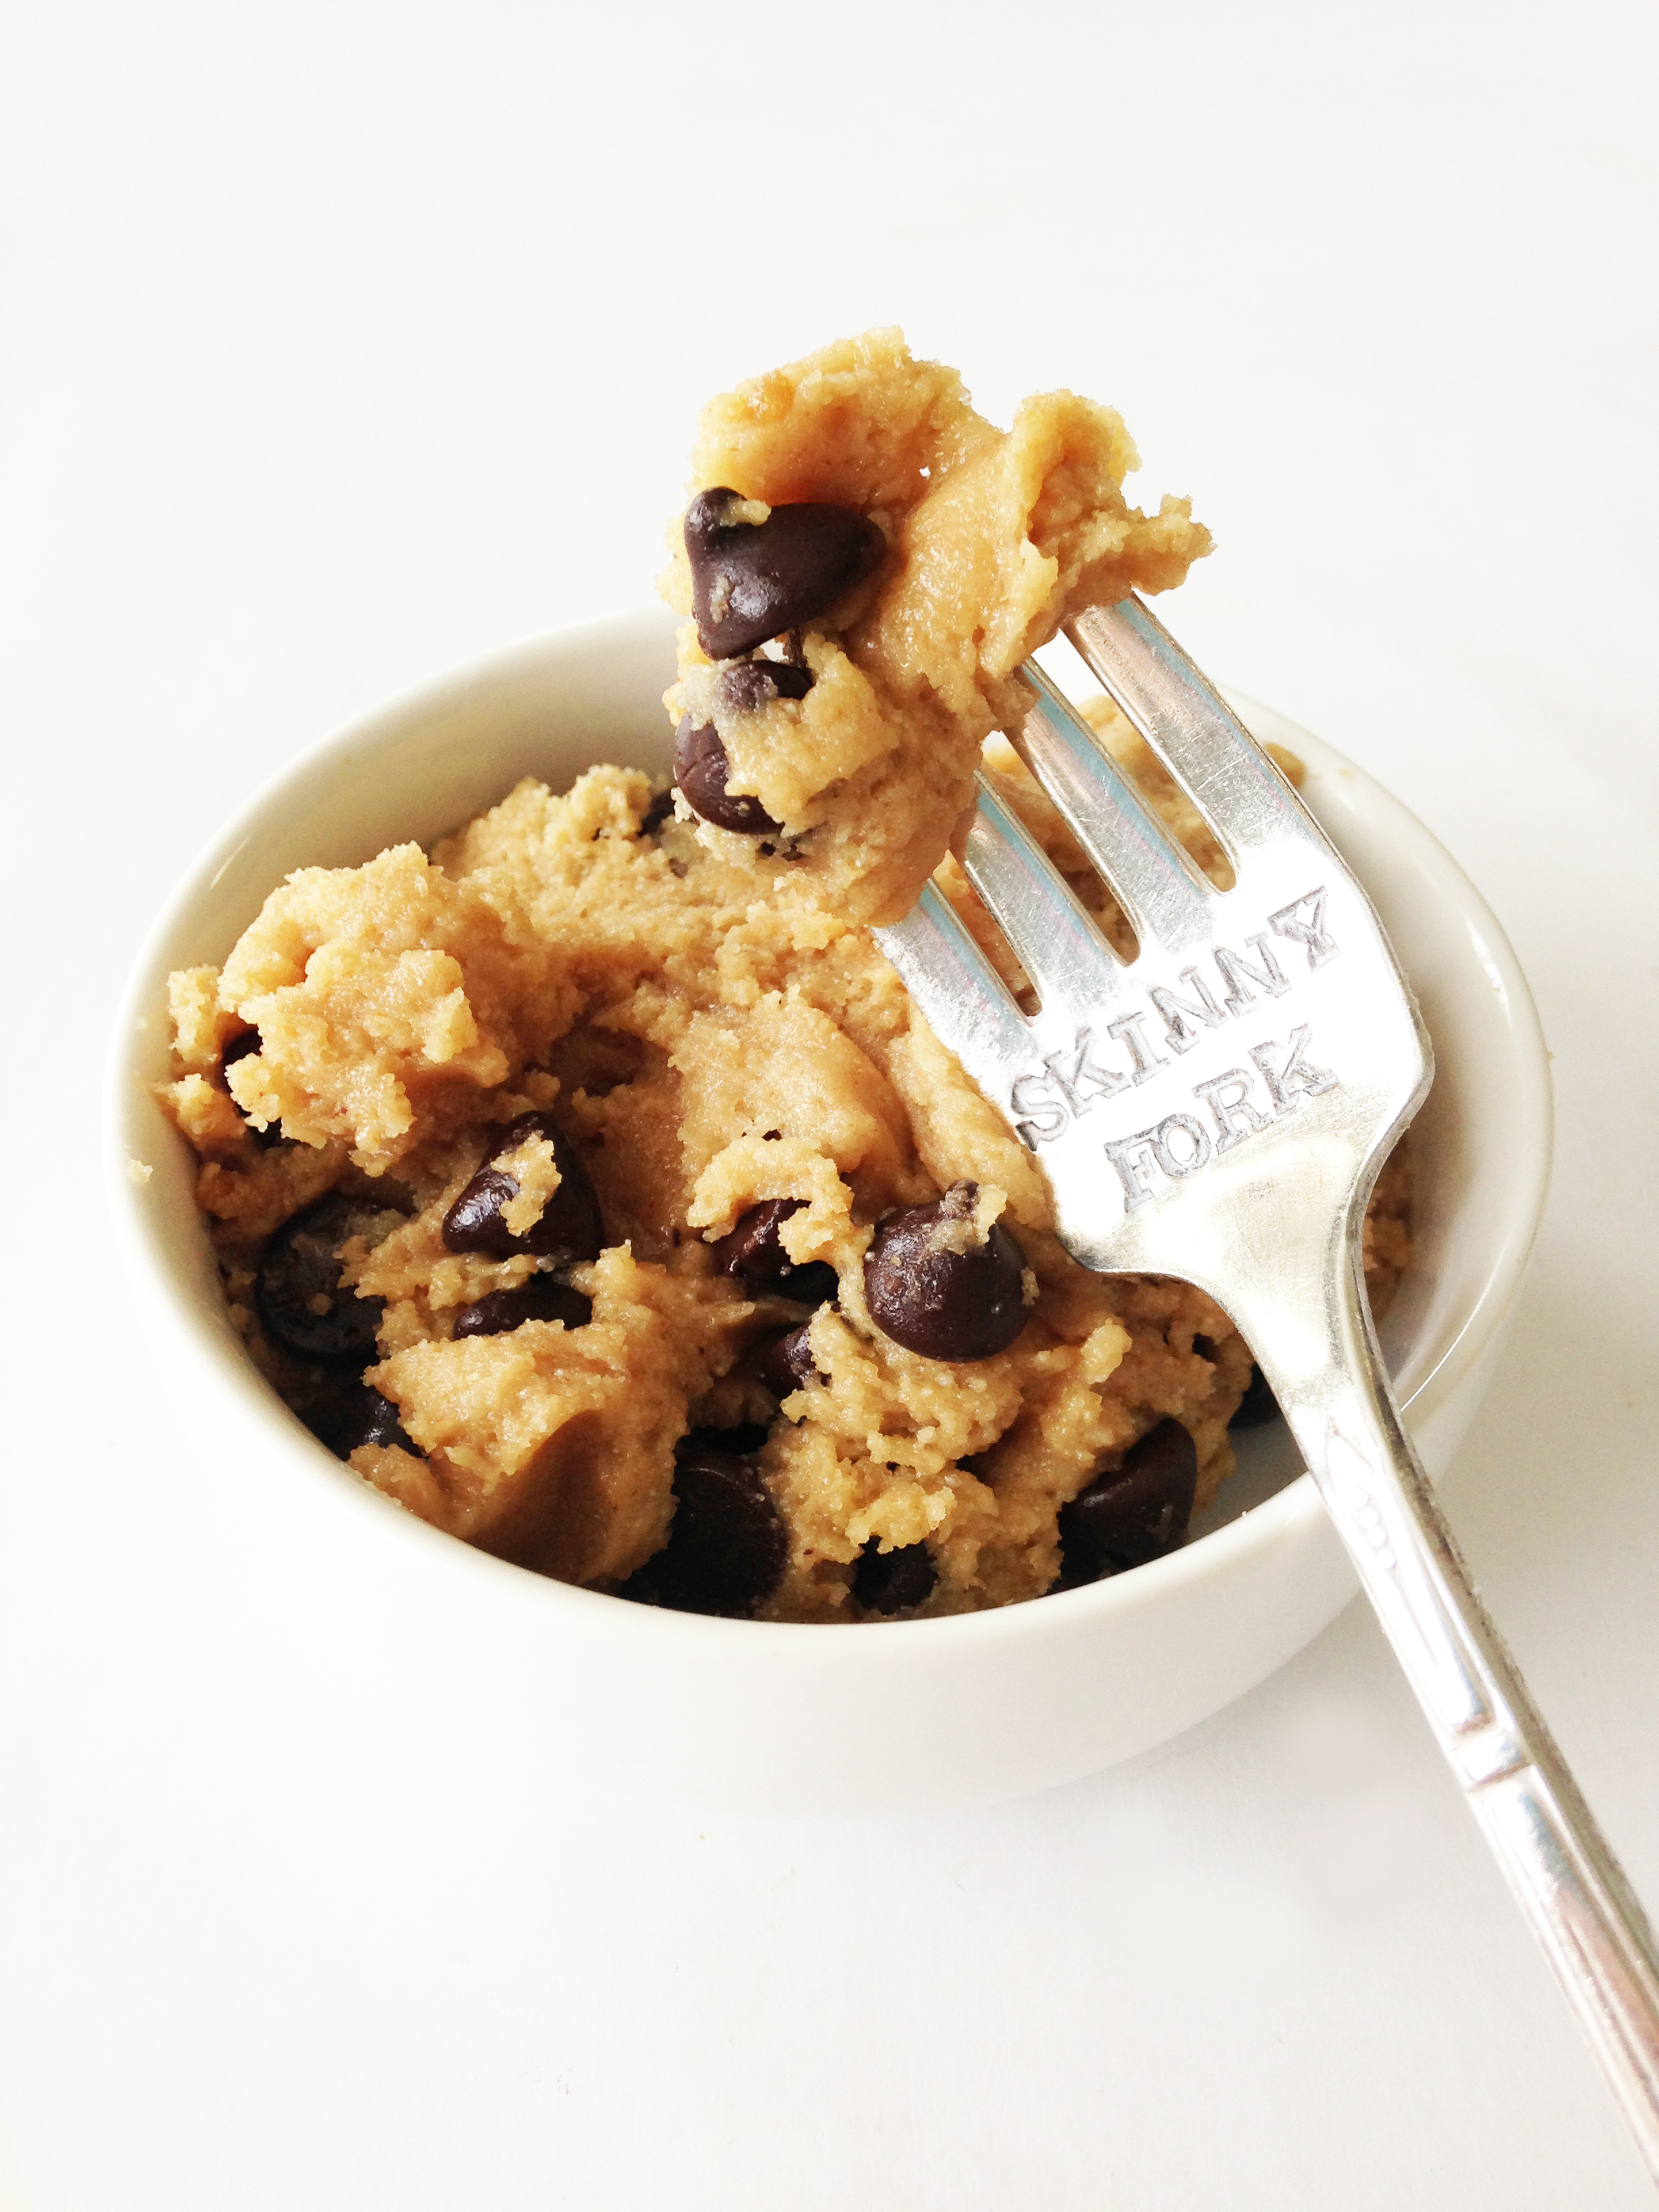 Edible Cookie Dough Recipe With Chocolate Chips